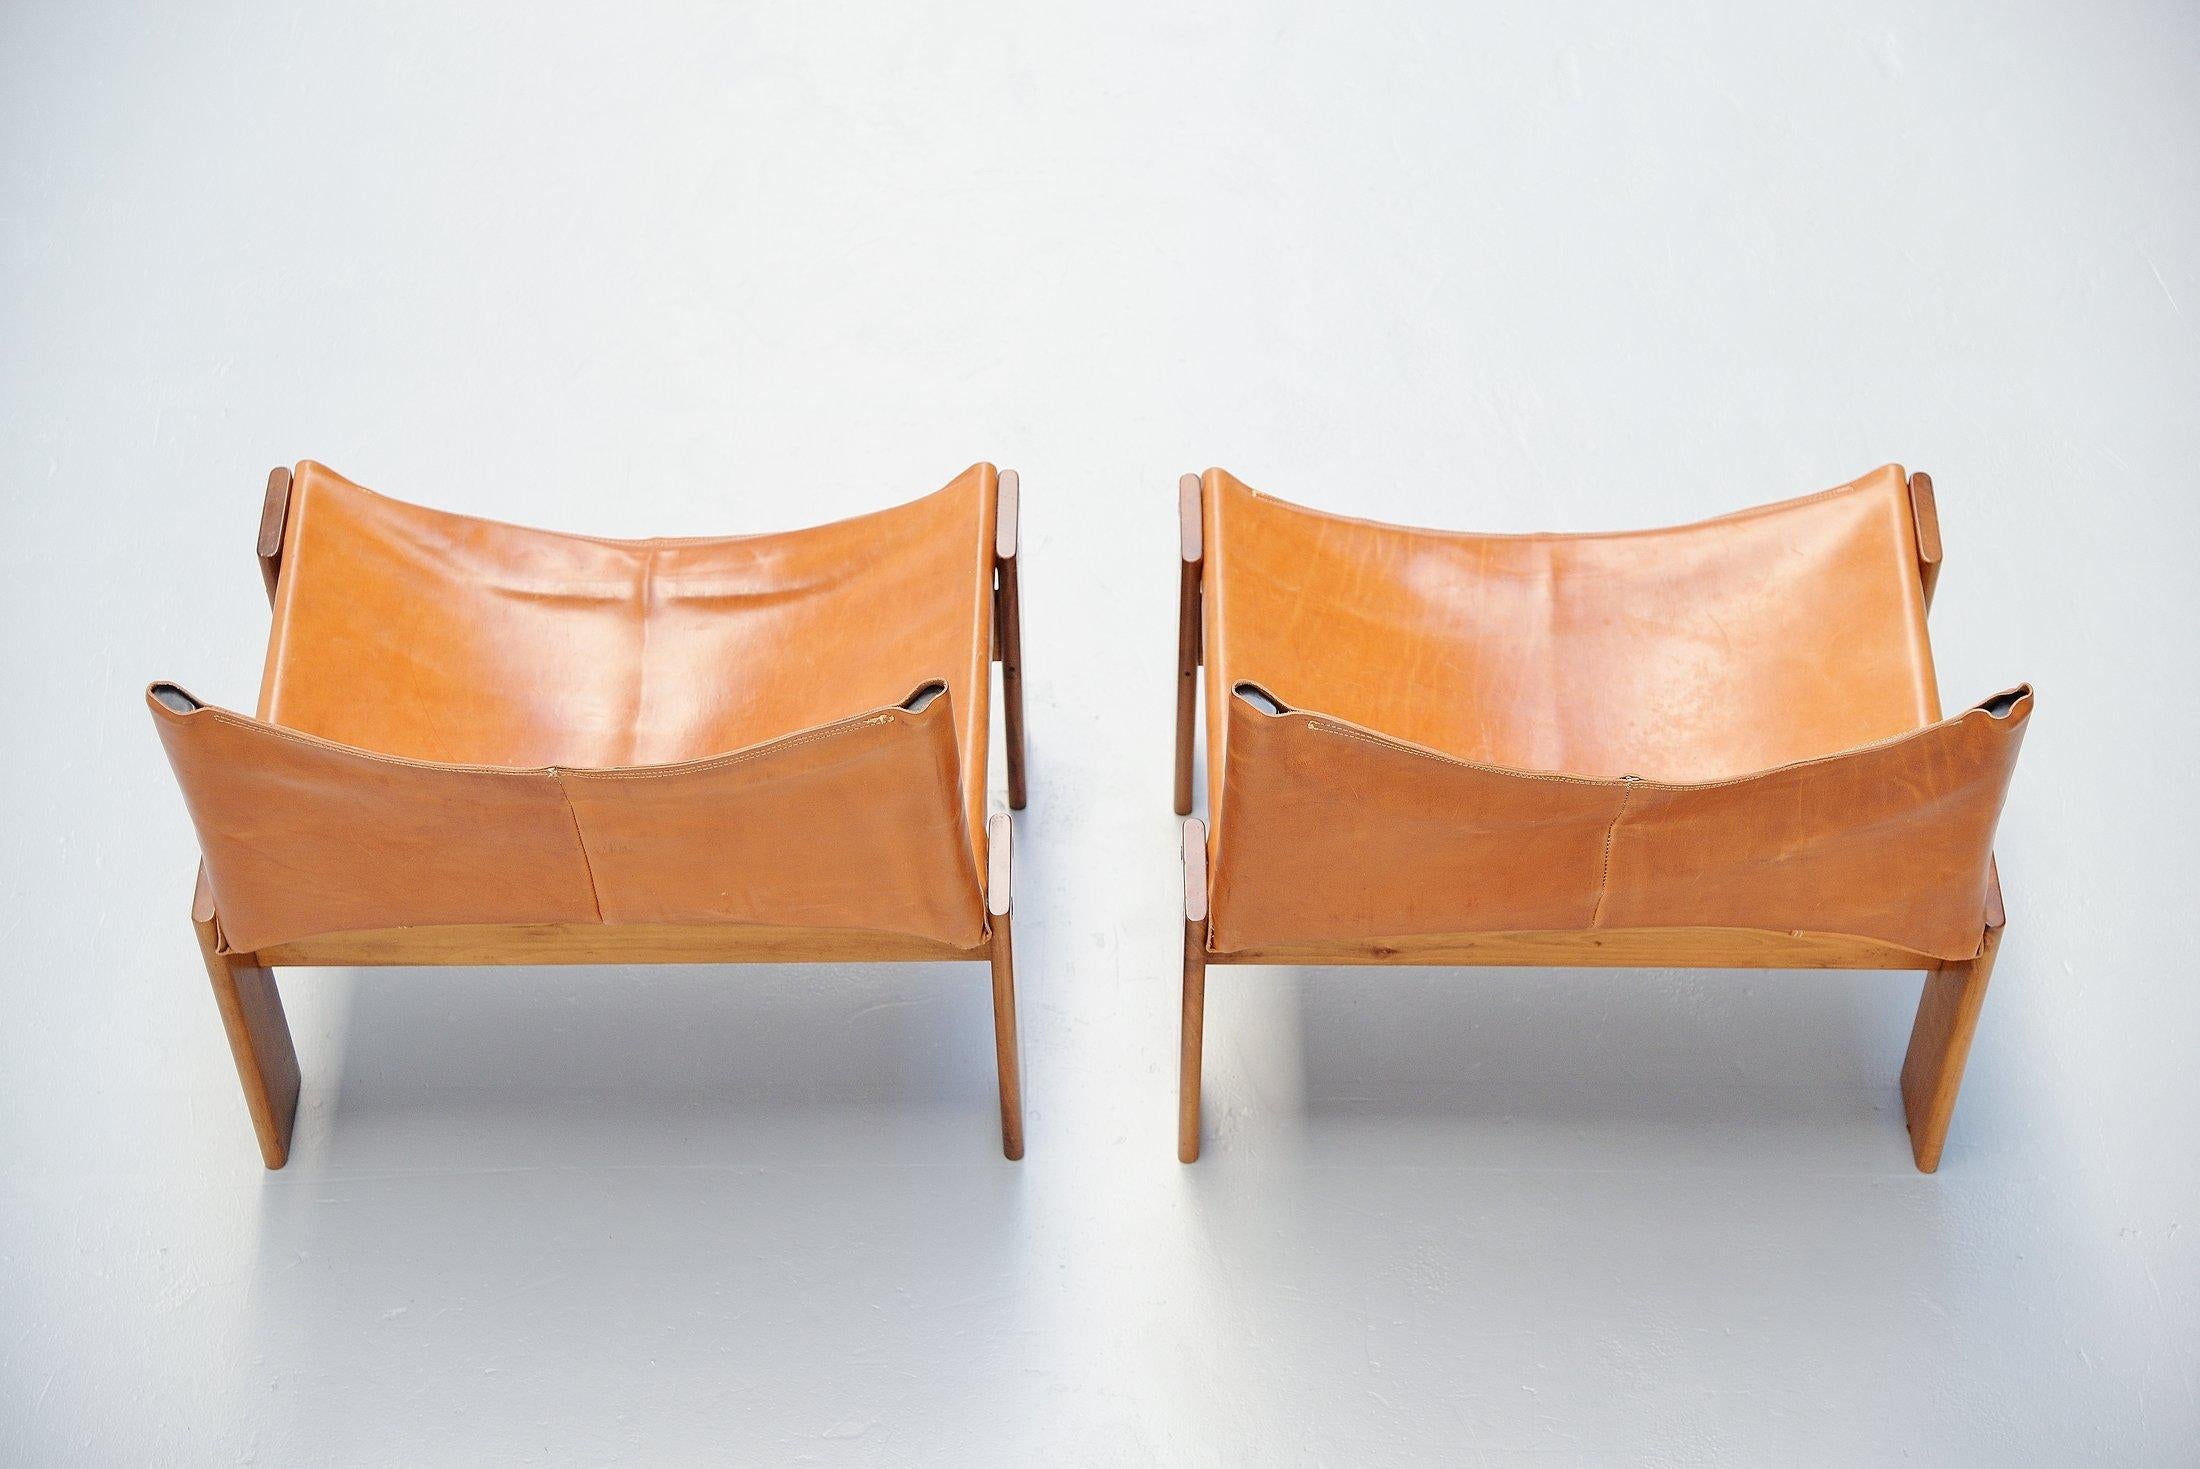 Afre e Tobia Scarpa Monk Lounge Chairs Molteni, Italy, 1974 In Good Condition In Roosendaal, Noord Brabant